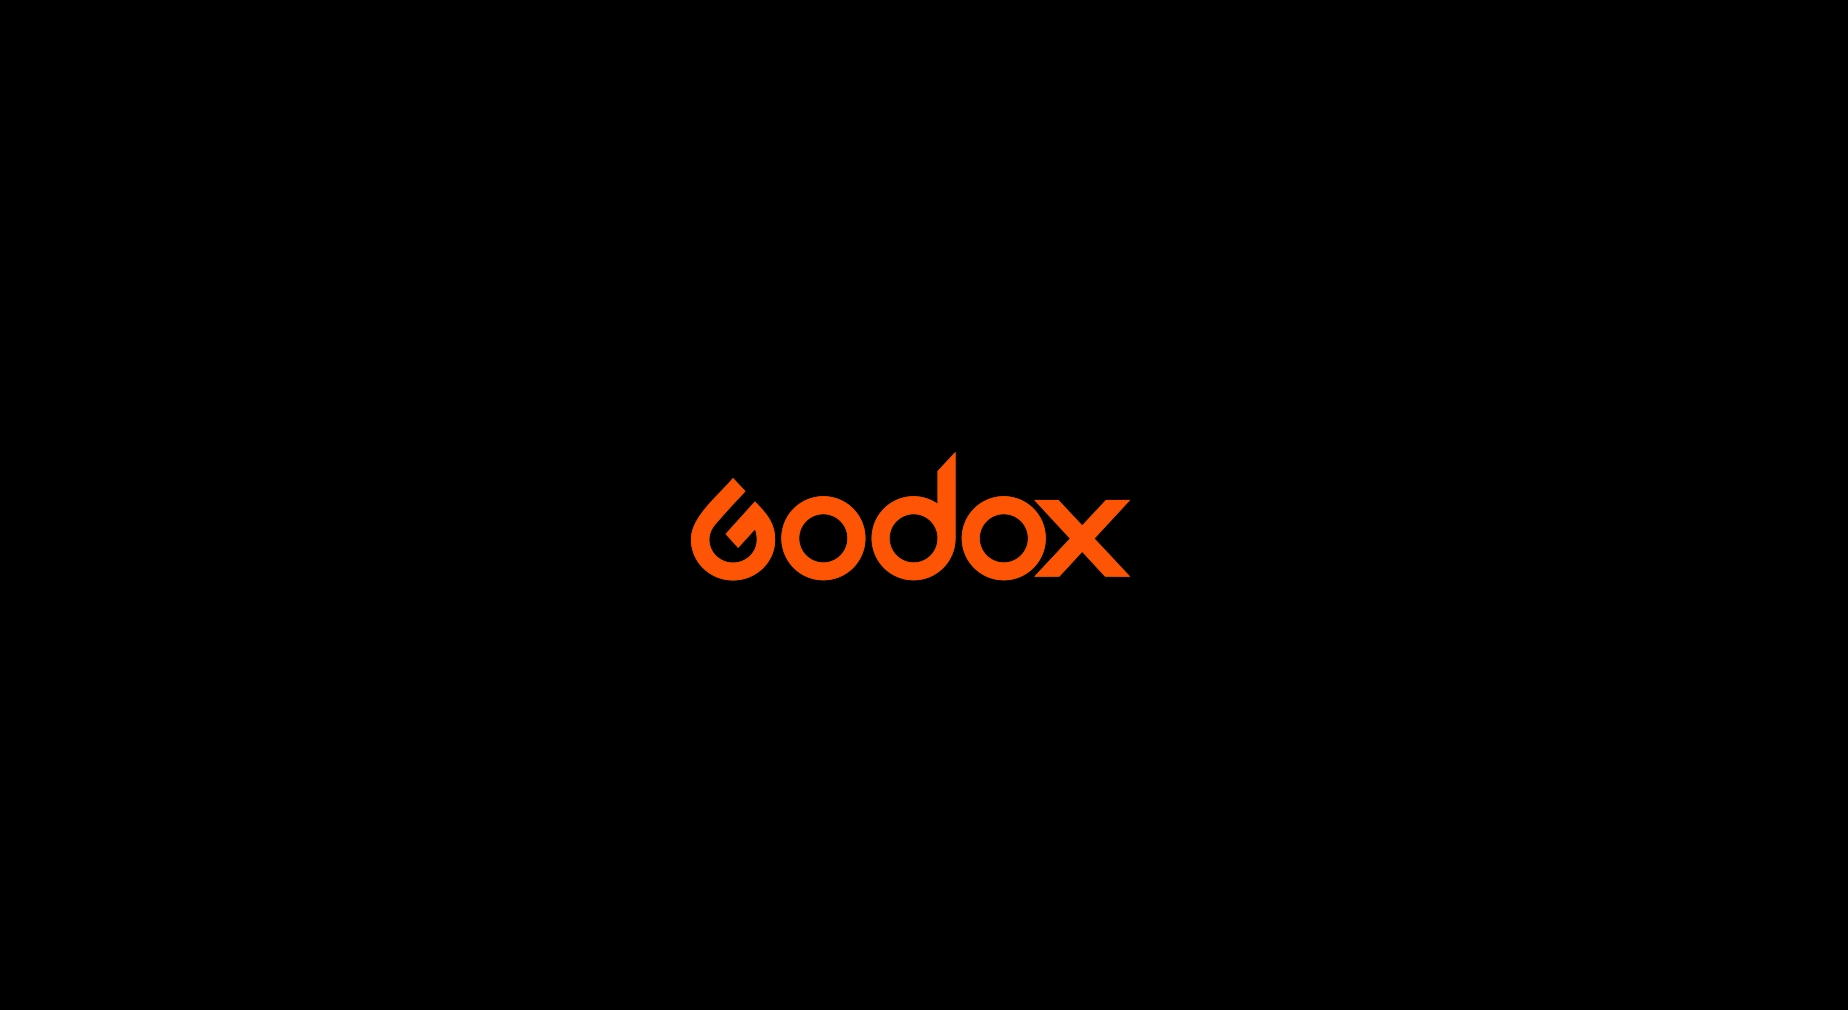 Flashpoint and Godox: Exploring the Relationship between Two Brands